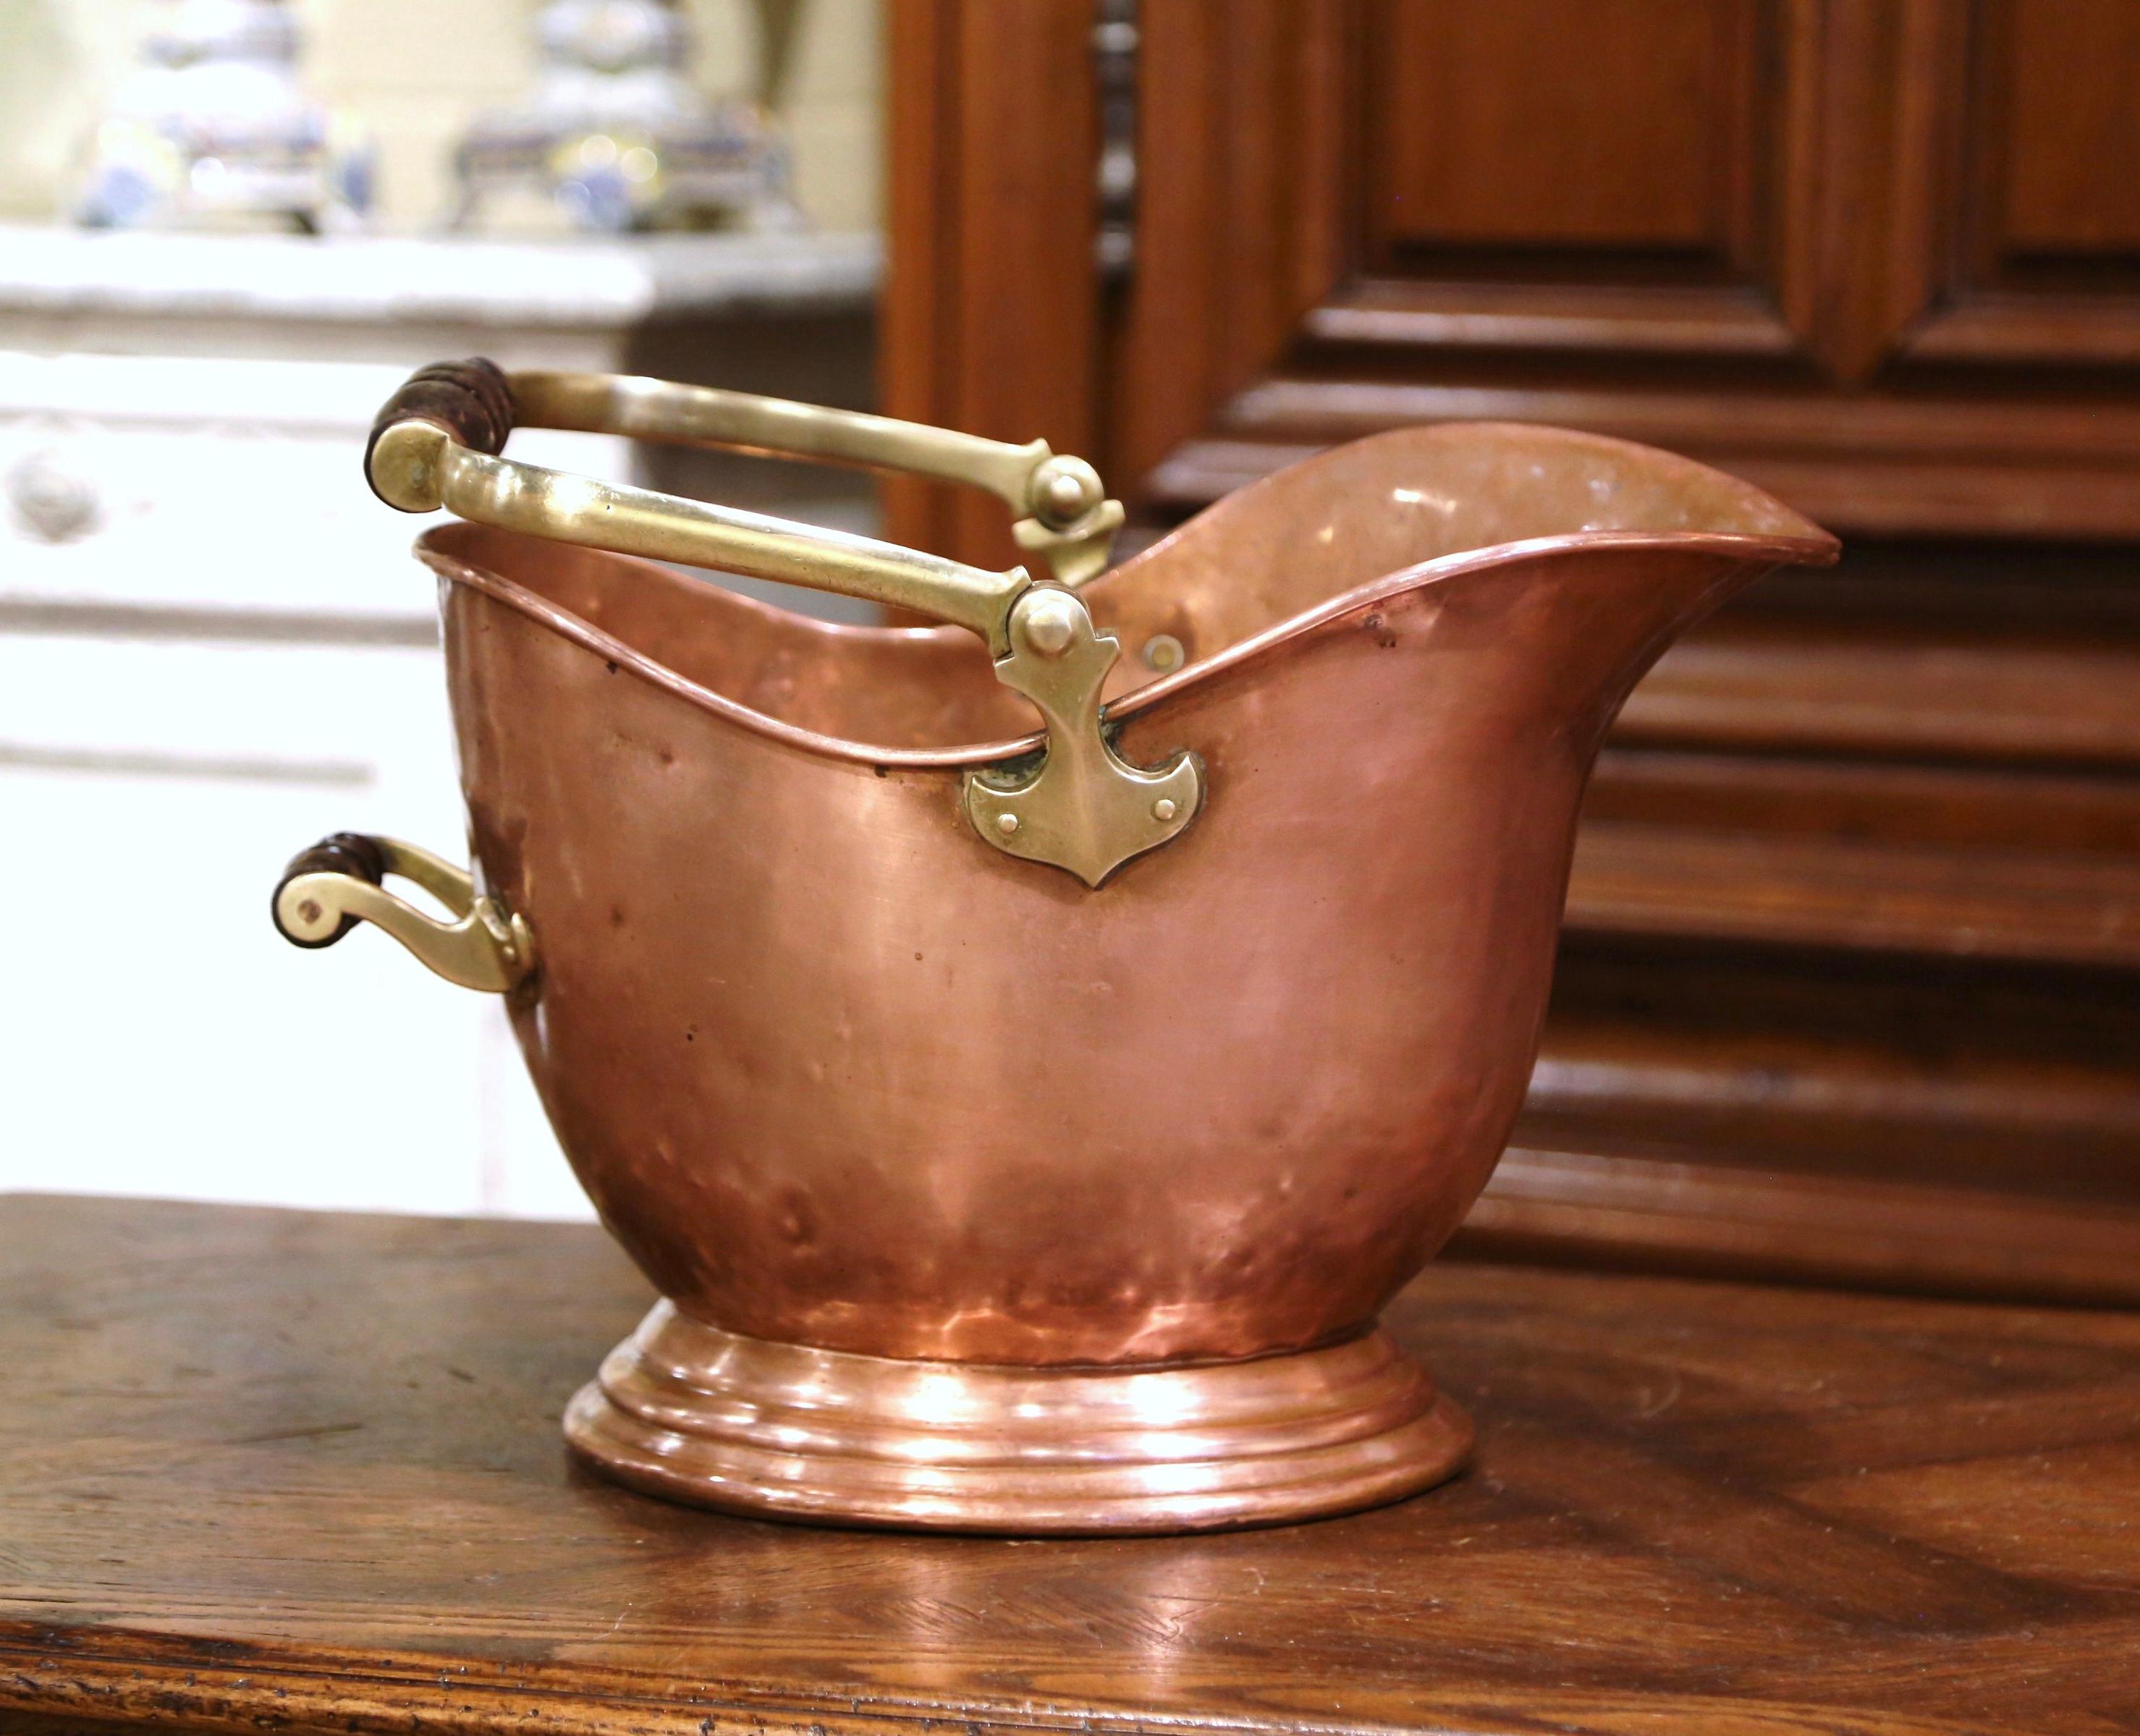 This antique coal scuttle was created in England, circa 1880. Built of copper with a brass and turned walnut handle, the oblong bucket stands on a round base. The versatile decorative box is in excellent condition; it could be use next to a